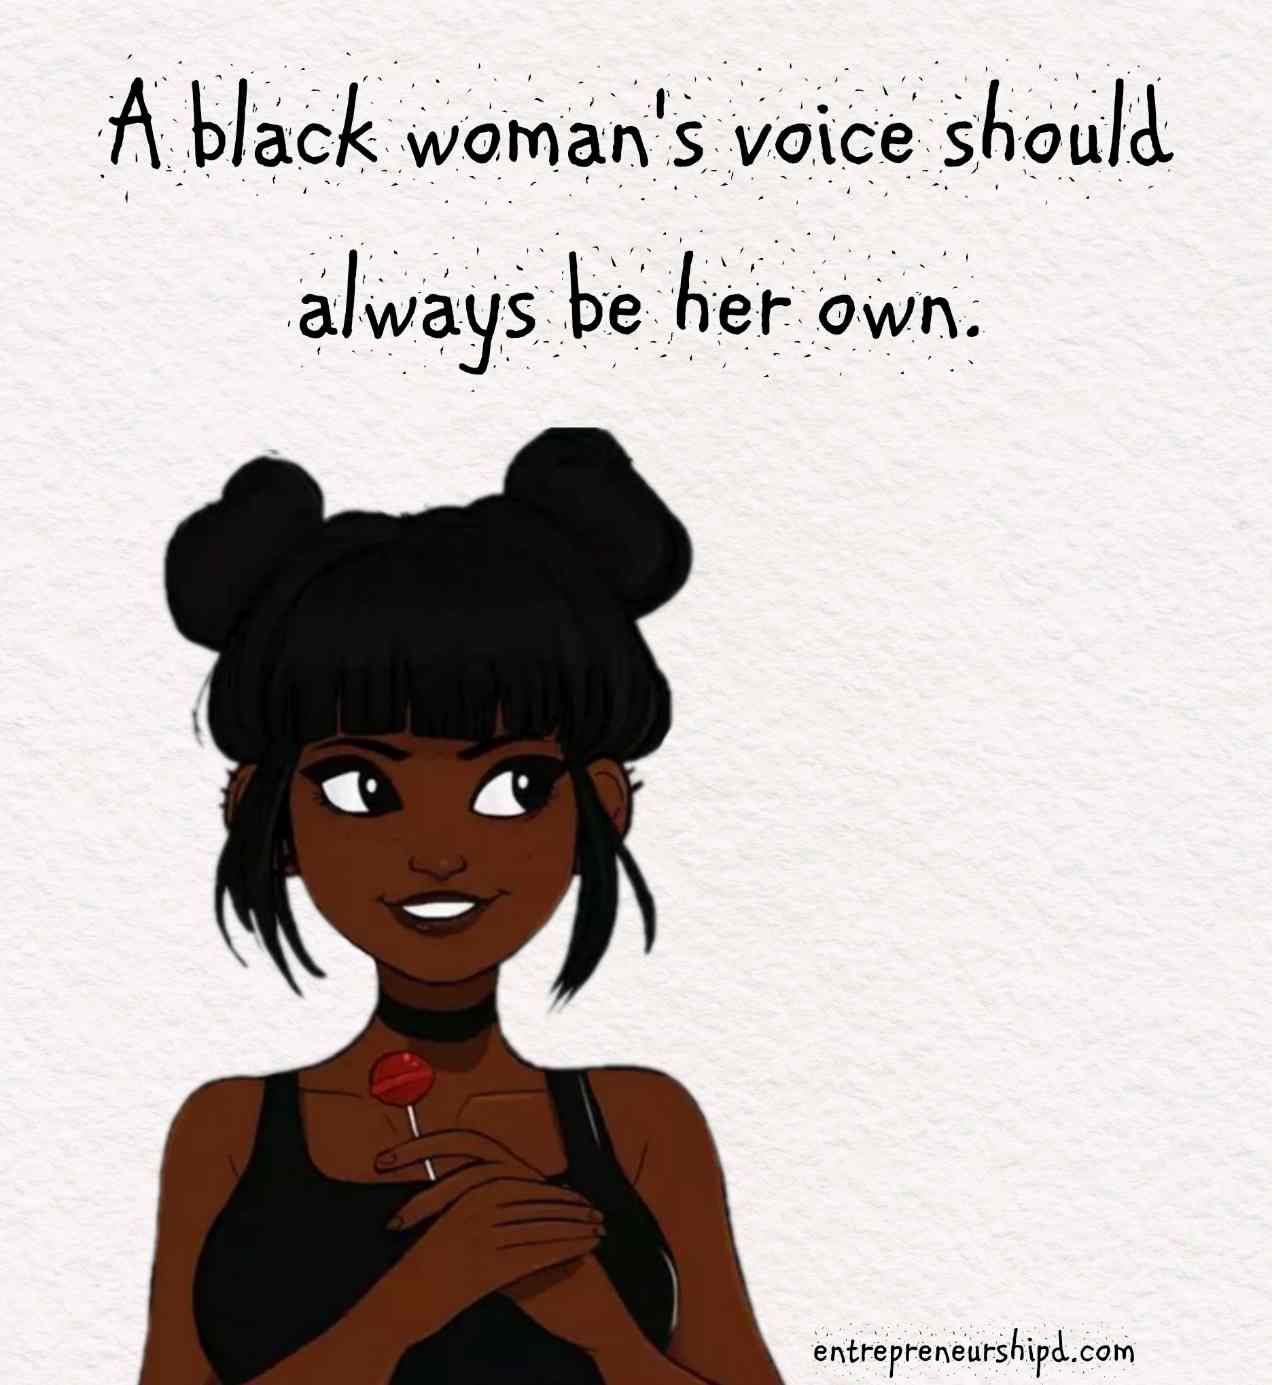 A black woman's voice should always be her own.